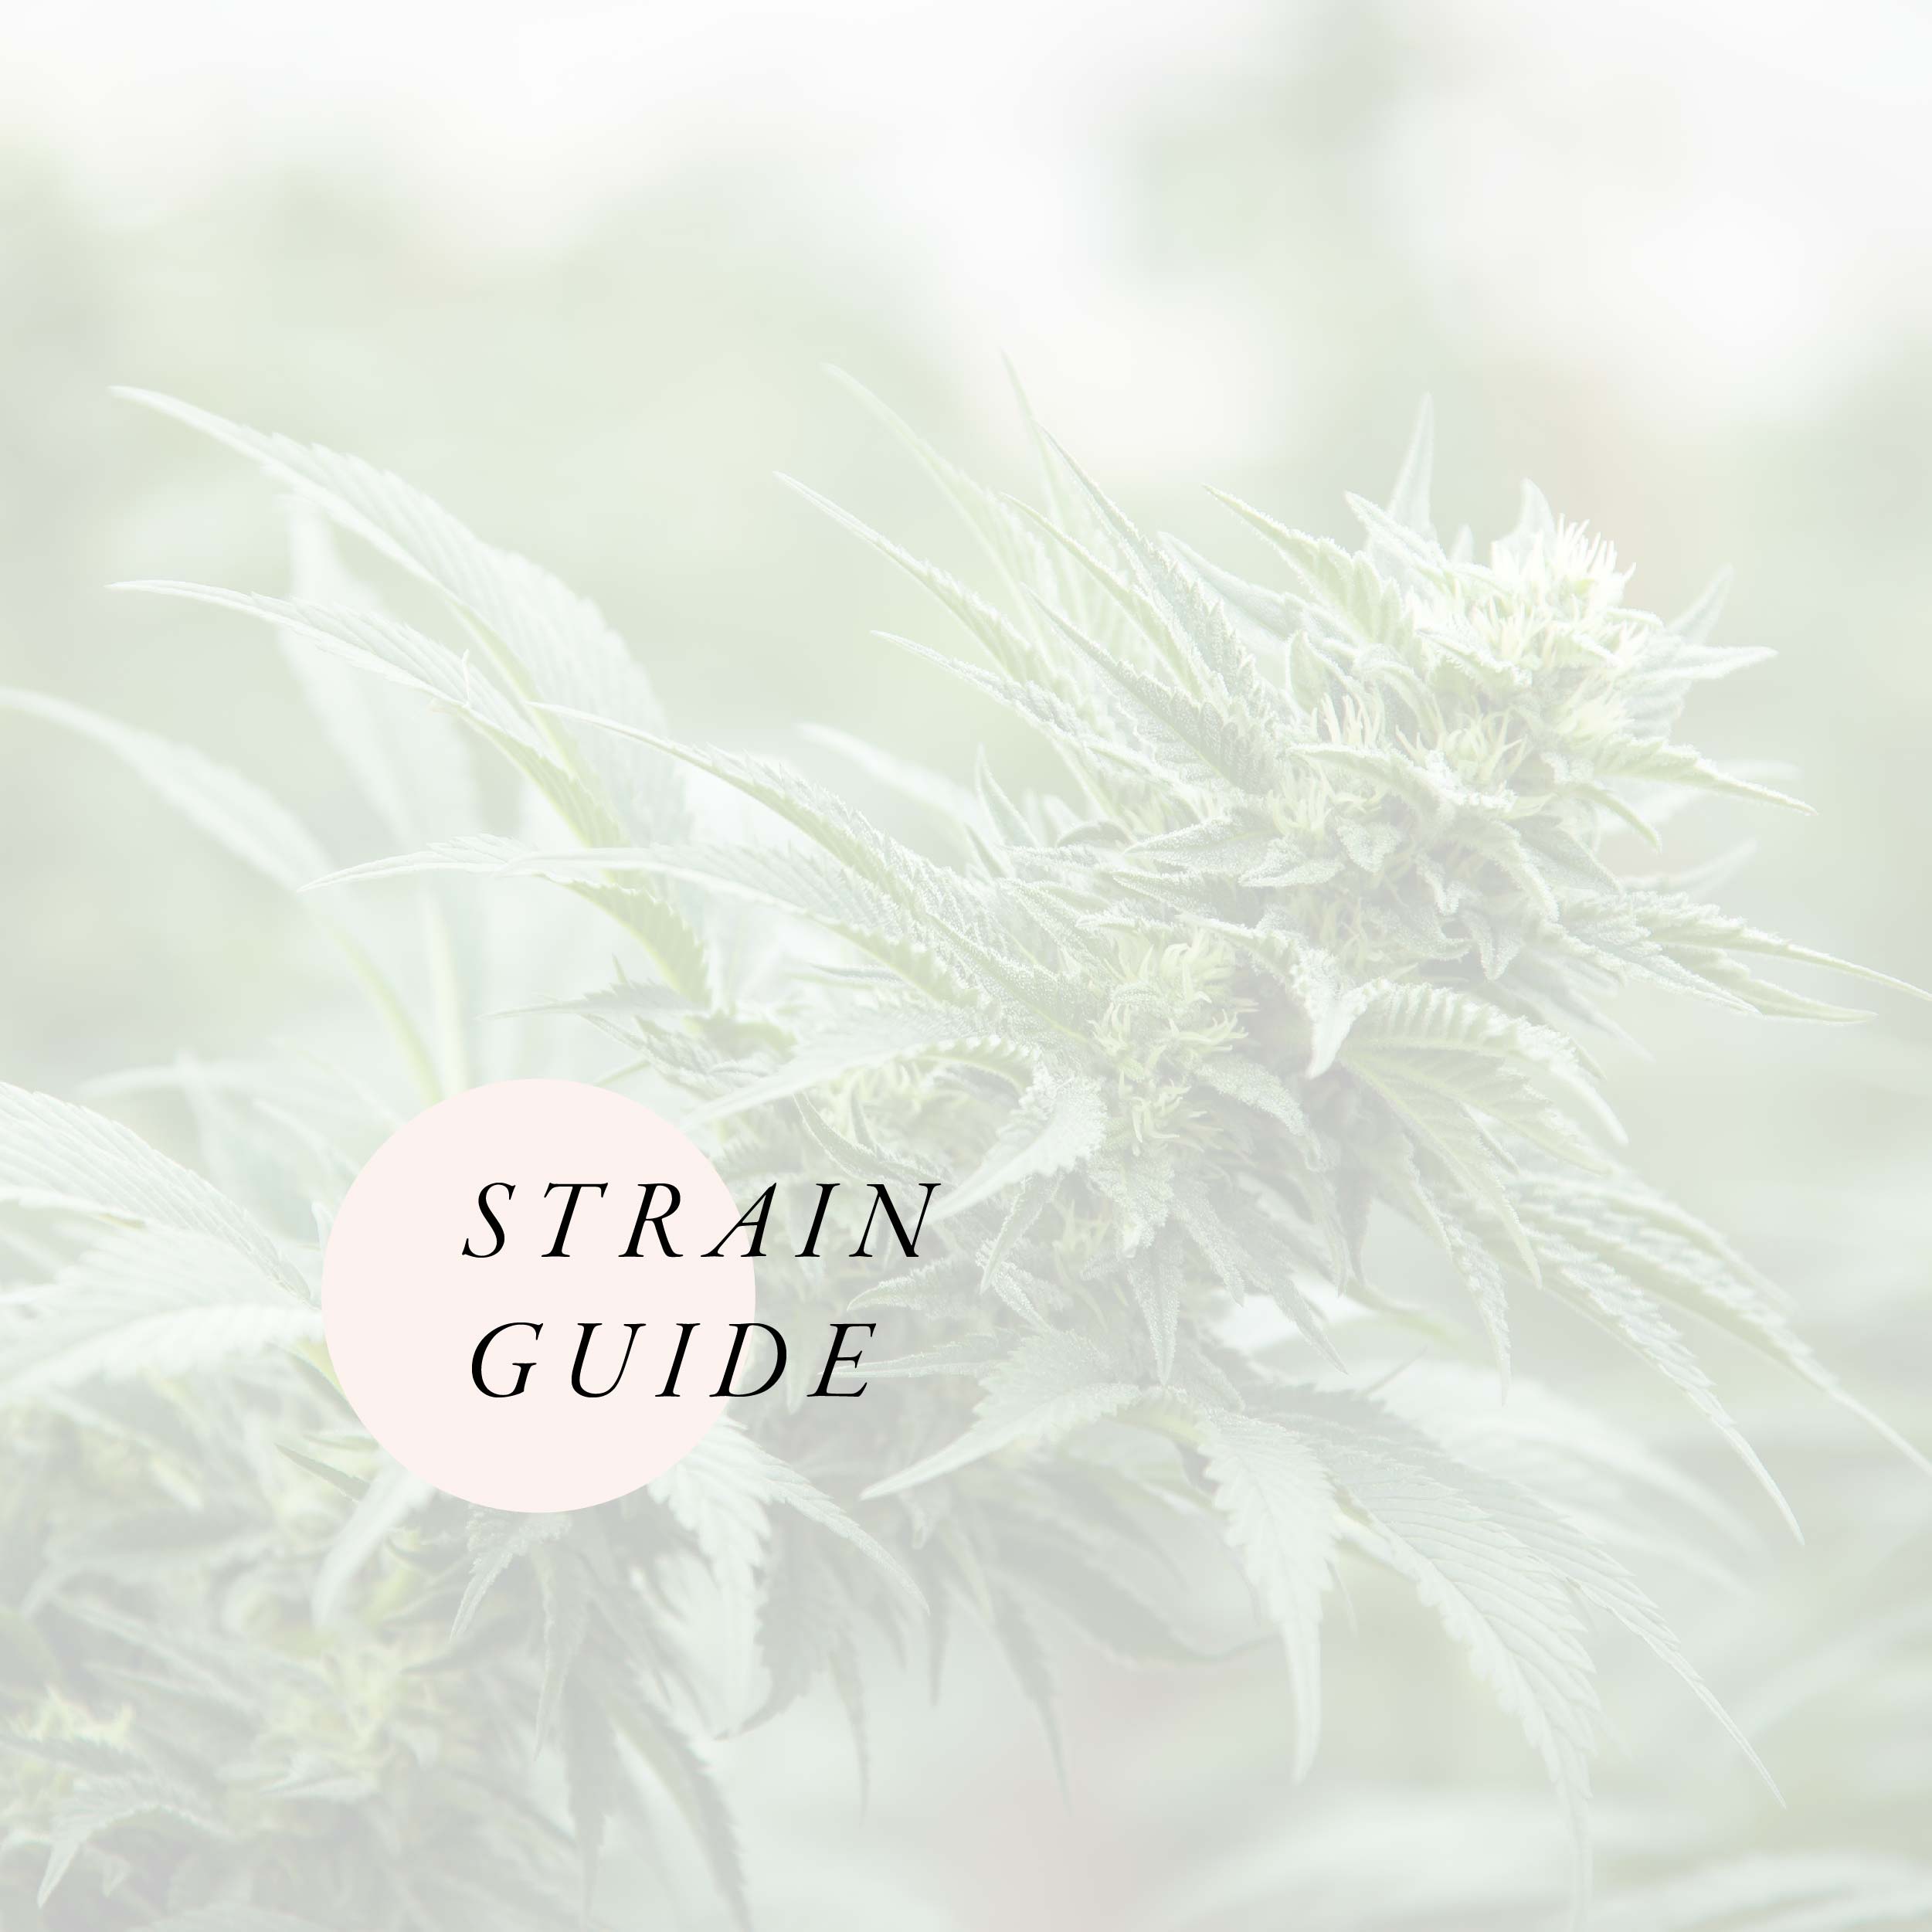 LINK GRAPHIC TO STRAIN GUIDE